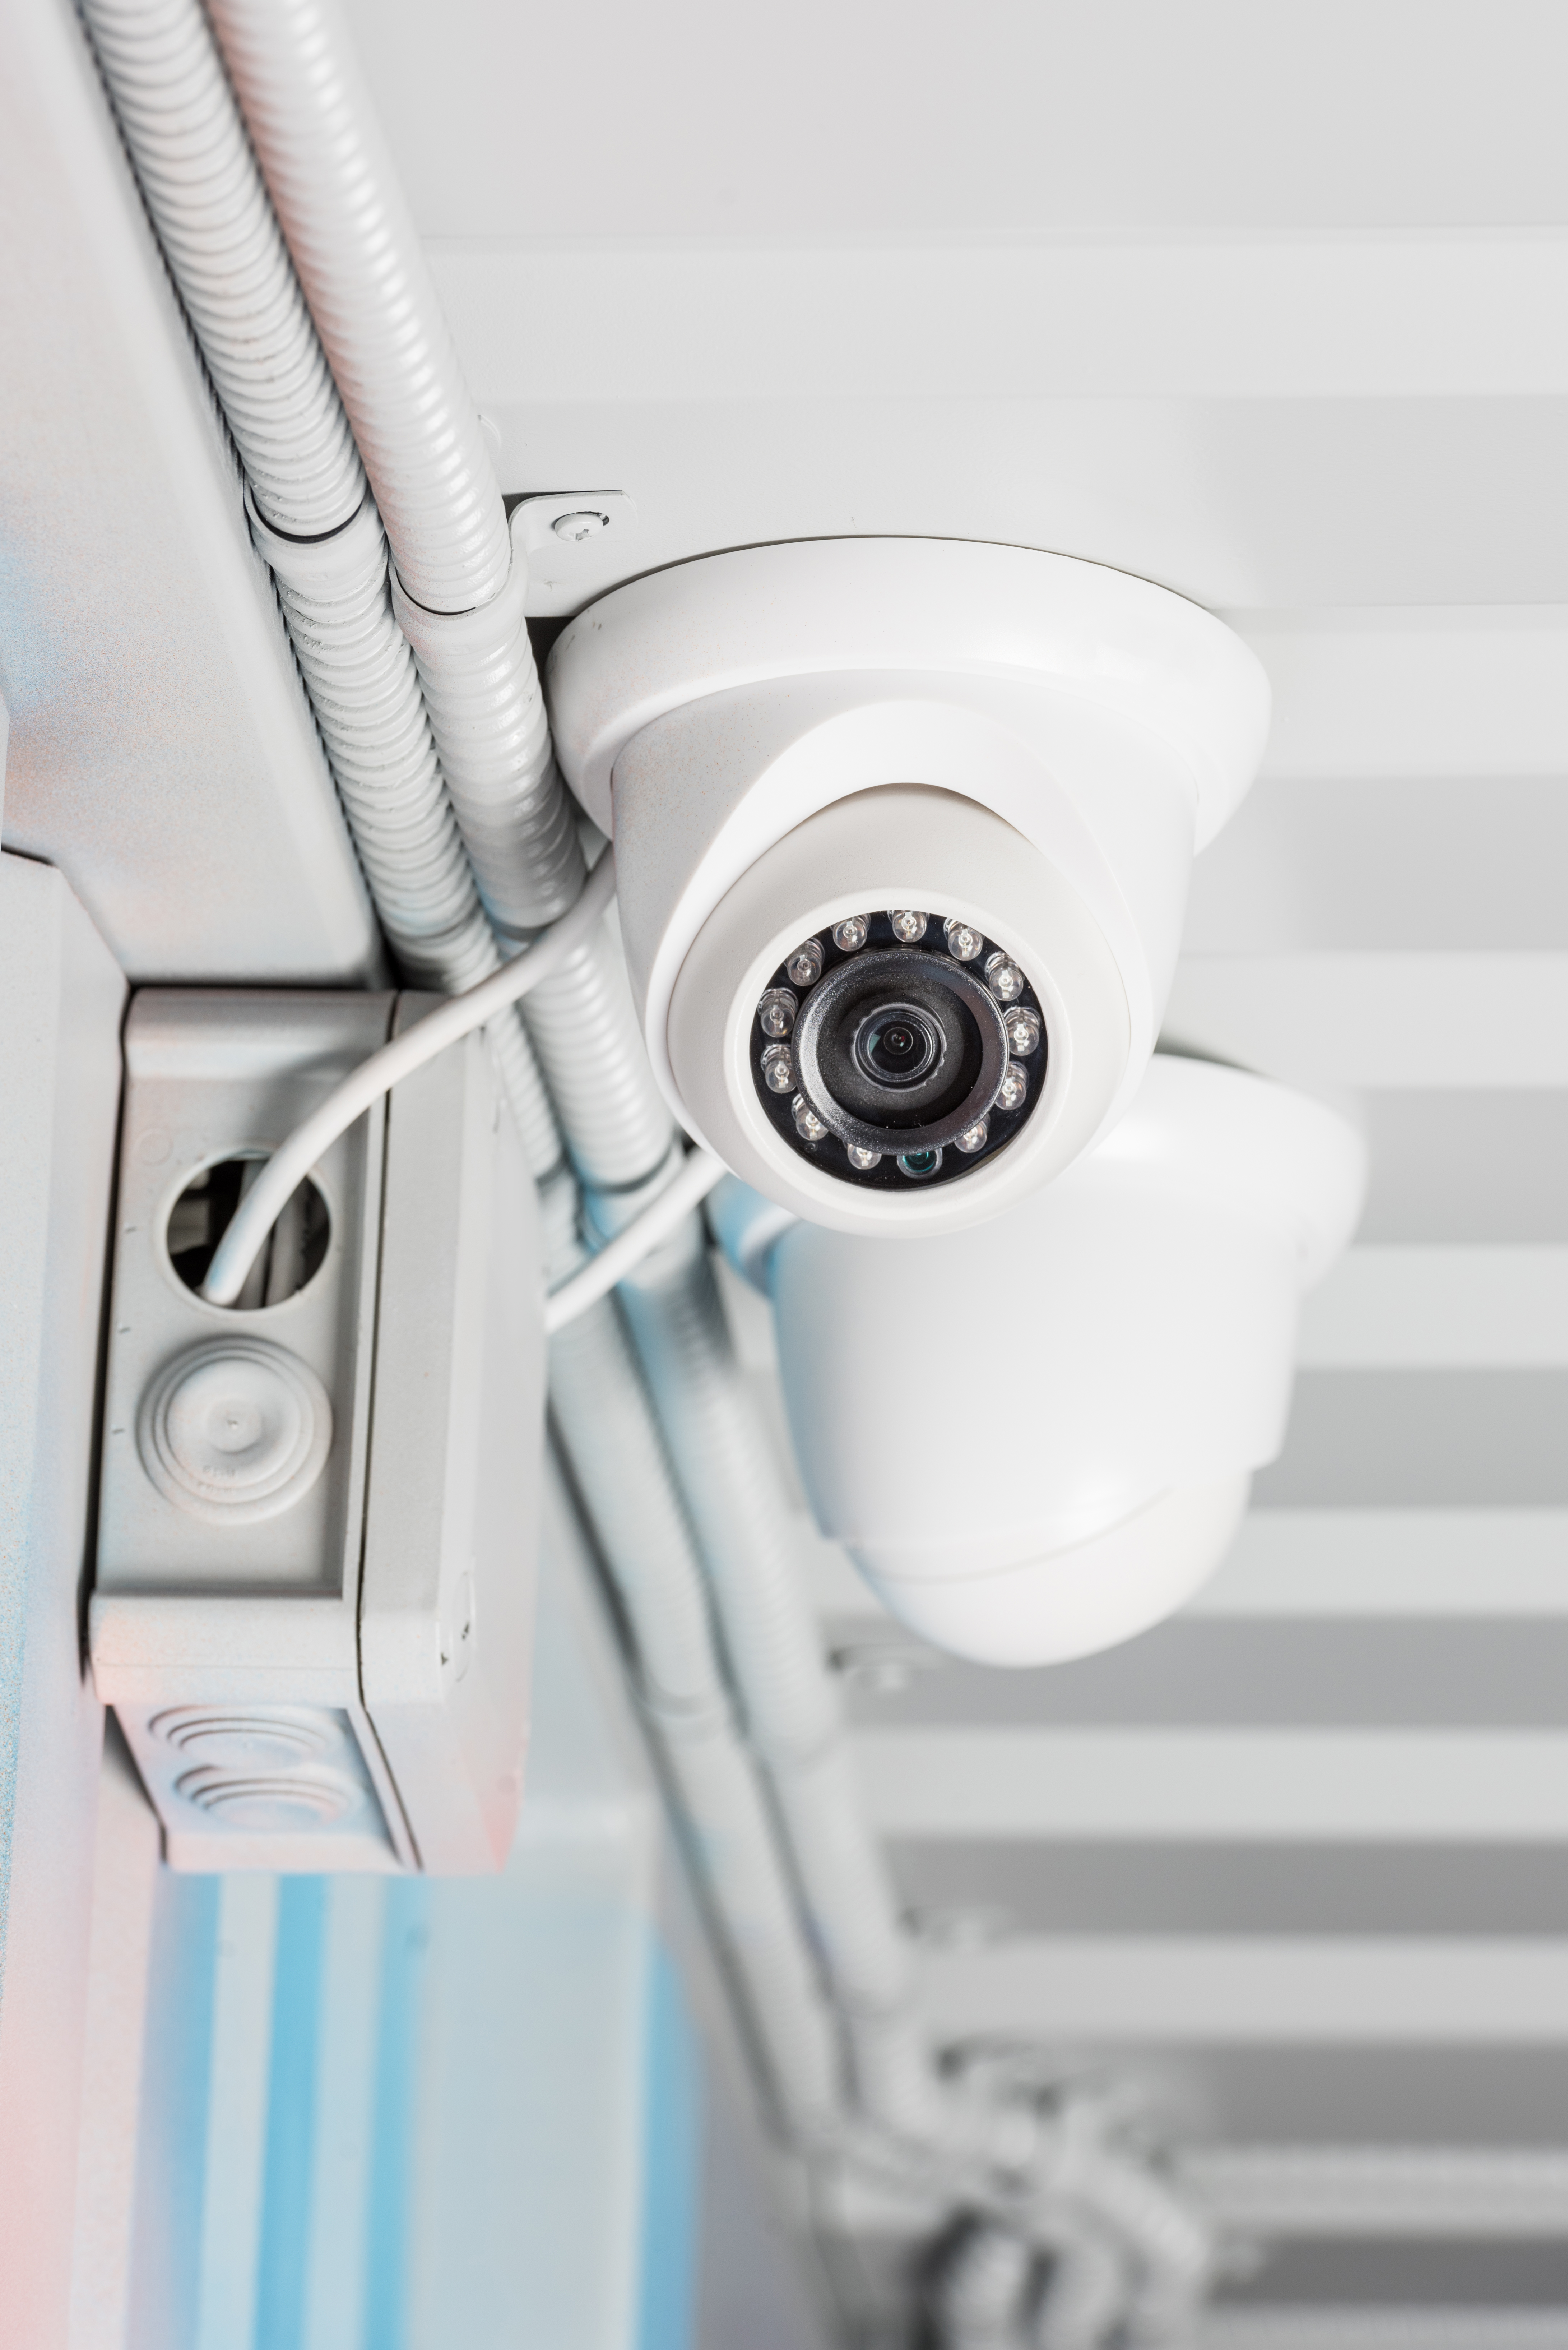 Ring Home Security System Services | Expert Installation & Monitoring